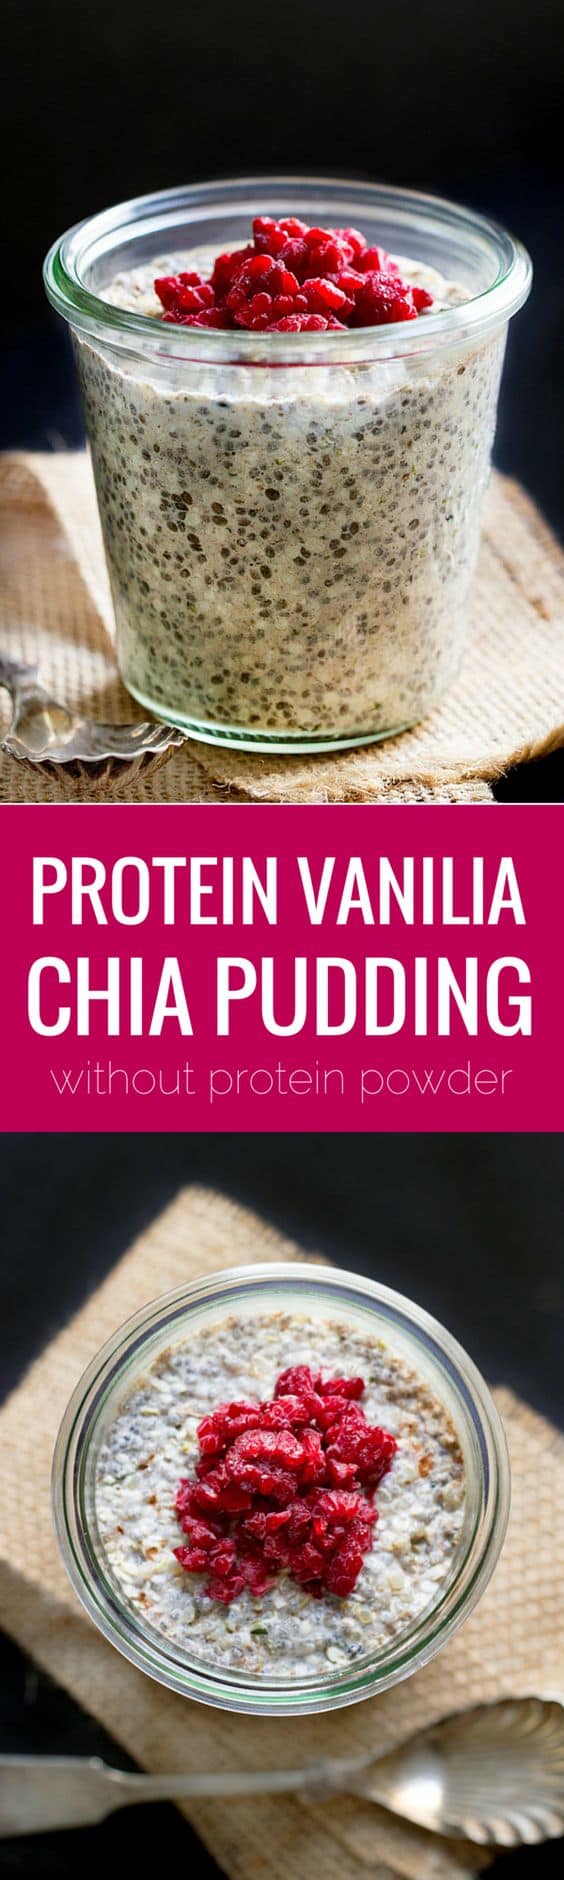 High Protein Vanilla CHIA PUDDING - made without protein powder. This healthy pudding recipe has 18g of protein per serving and is made with all natural, gluten-free ingredients. It's quick, easy, delicious and vegan too!